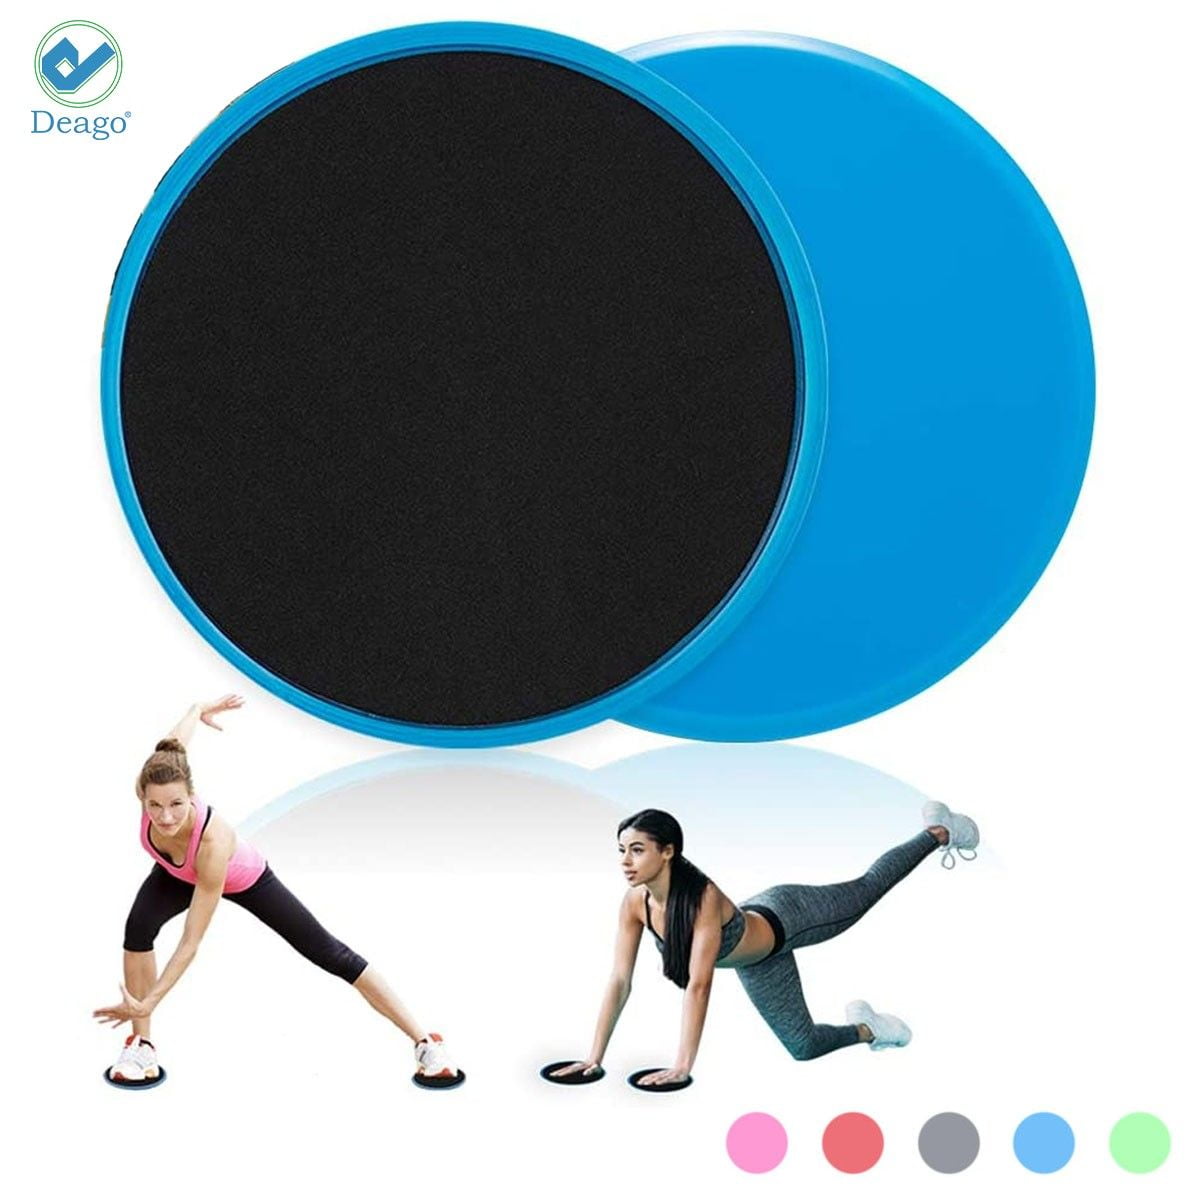 Dual Sided Exercise Sliding Gliders for Carpet 2 Pink Slider Discs Hard Floor Strength Slides for Ab Lunge Workout Perfect Peach Athletics Core Sliders: Gym Fitness Gliding Disc Sliders Core